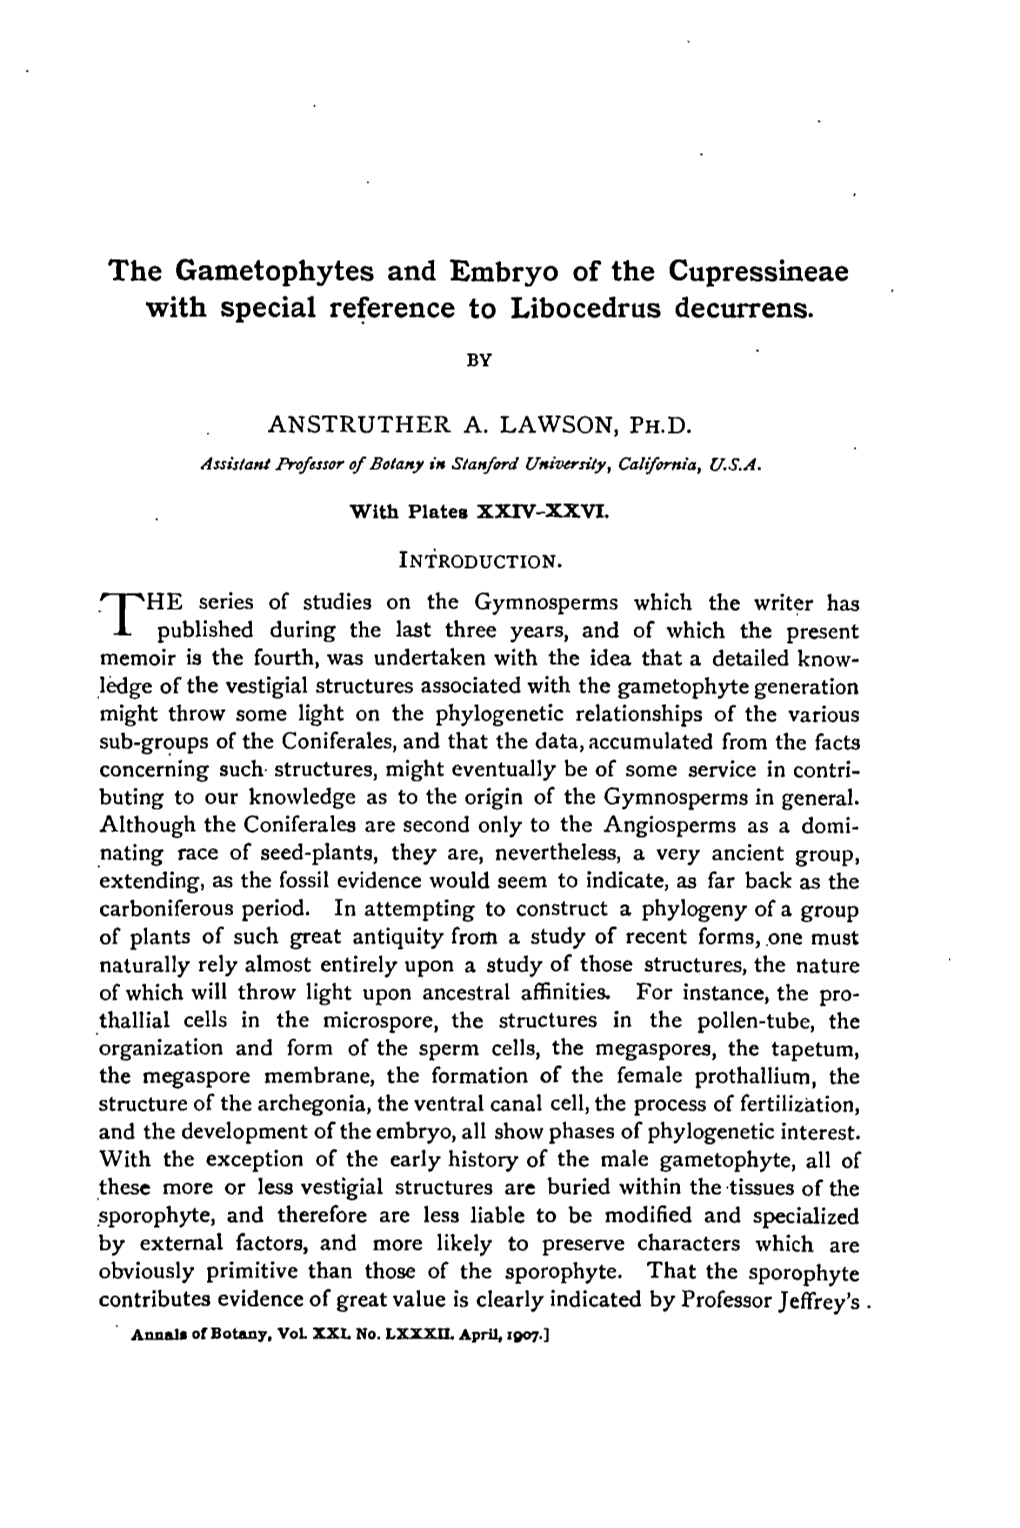 The Gametophytes and Embryo of the Cupressineae with Special Reference to Libocedrus Decurrens